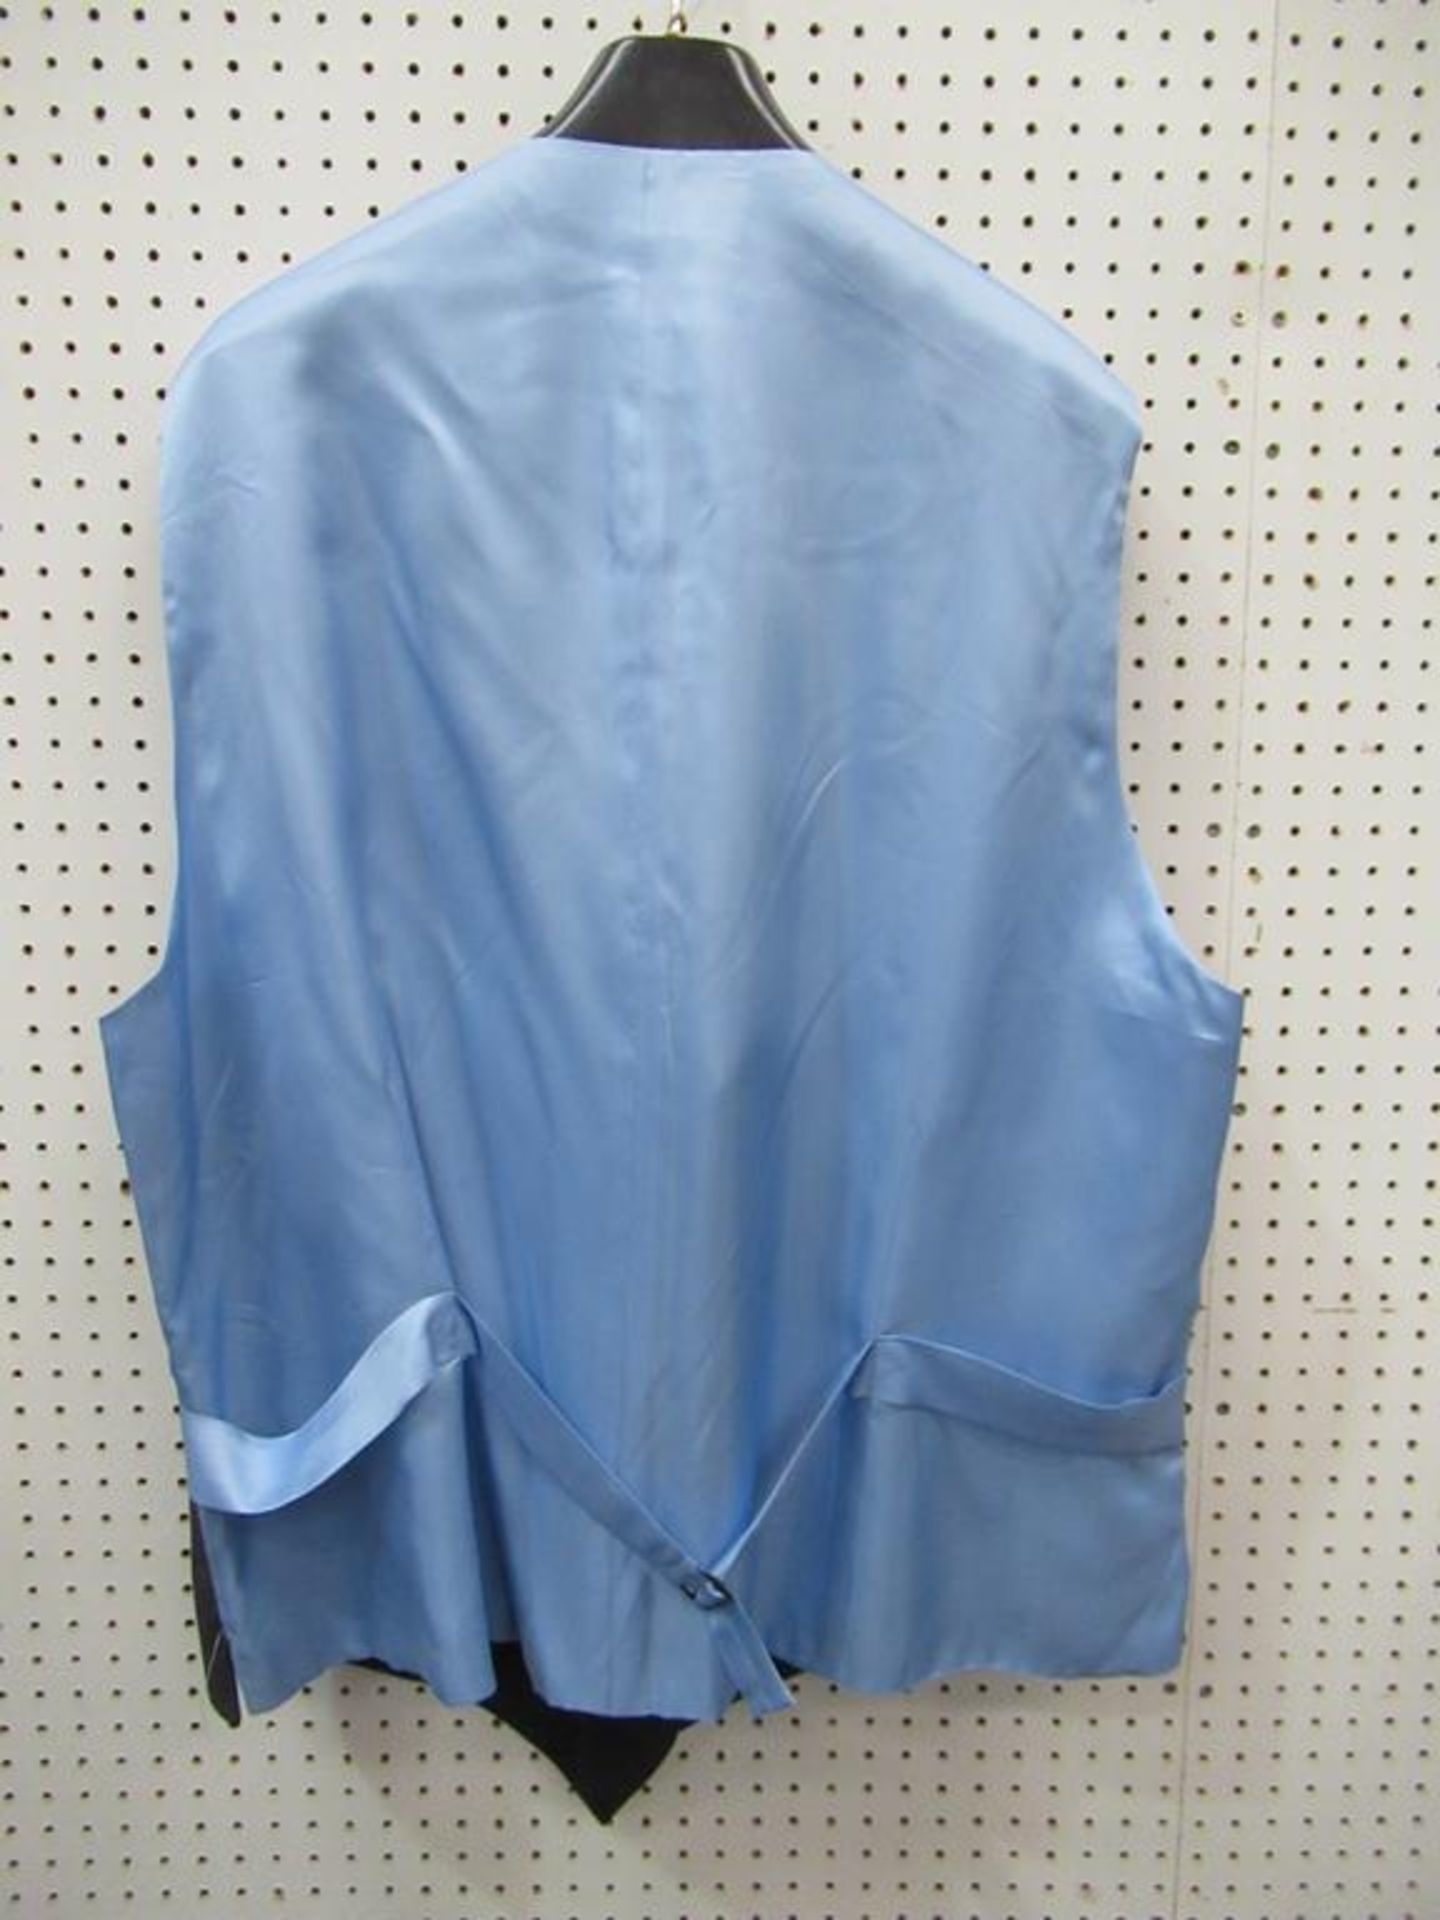 Wensum Tailoring single breasted waistcoat - Image 2 of 2